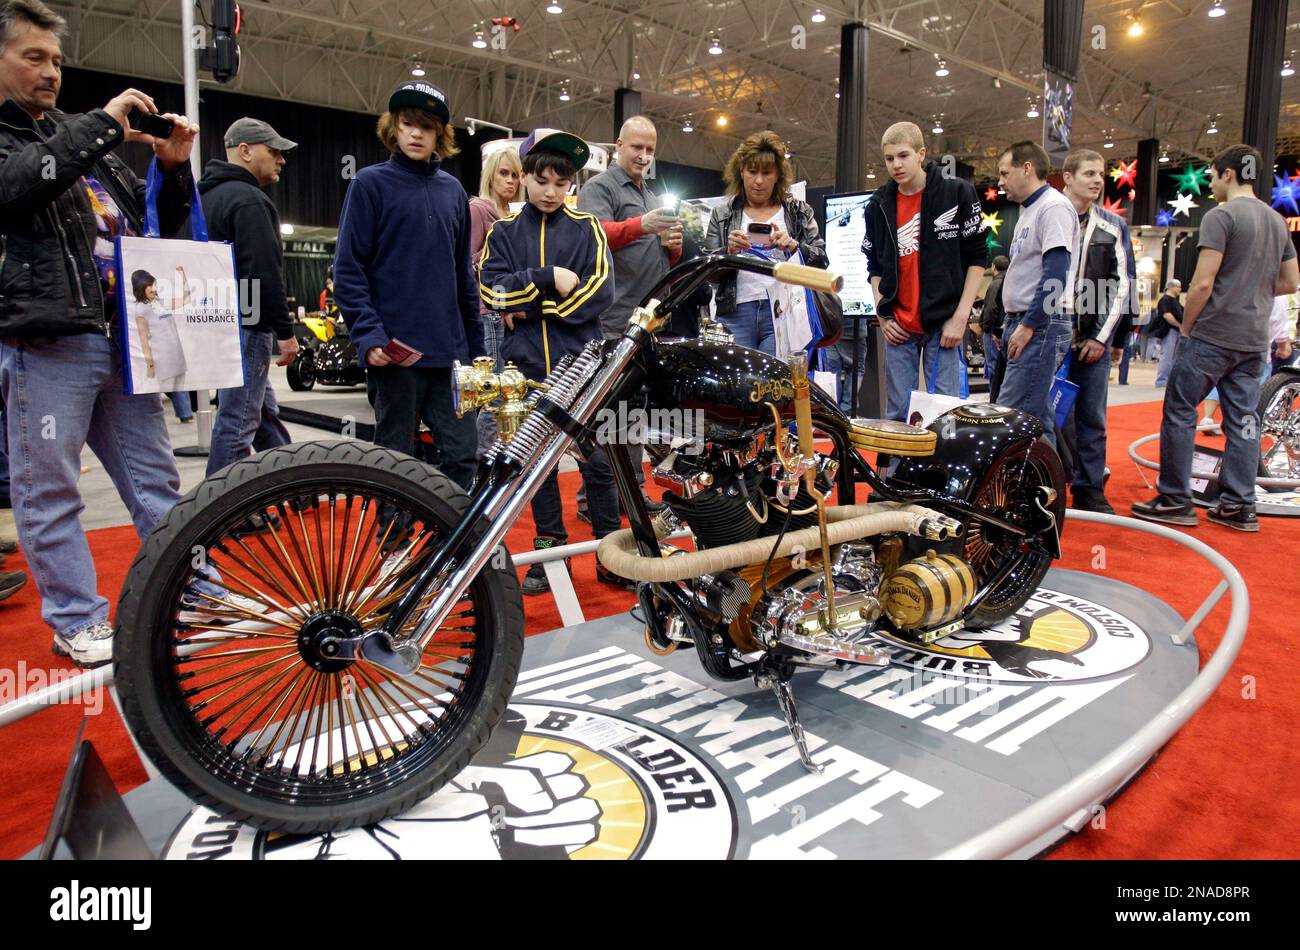 https://c8.alamy.com/comp/2NAD8PR/visitors-photograph-the-whiskey-bent-custom-mororcycle-at-the-progressive-international-motorcycle-show-at-the-i-x-center-in-cleveland-sunday-jan-29-2012-the-jack-daniels-themed-bike-was-built-by-jon-shipley-of-hoosier-daddy-choppers-in-indiana-ap-photomark-duncan-2NAD8PR.jpg